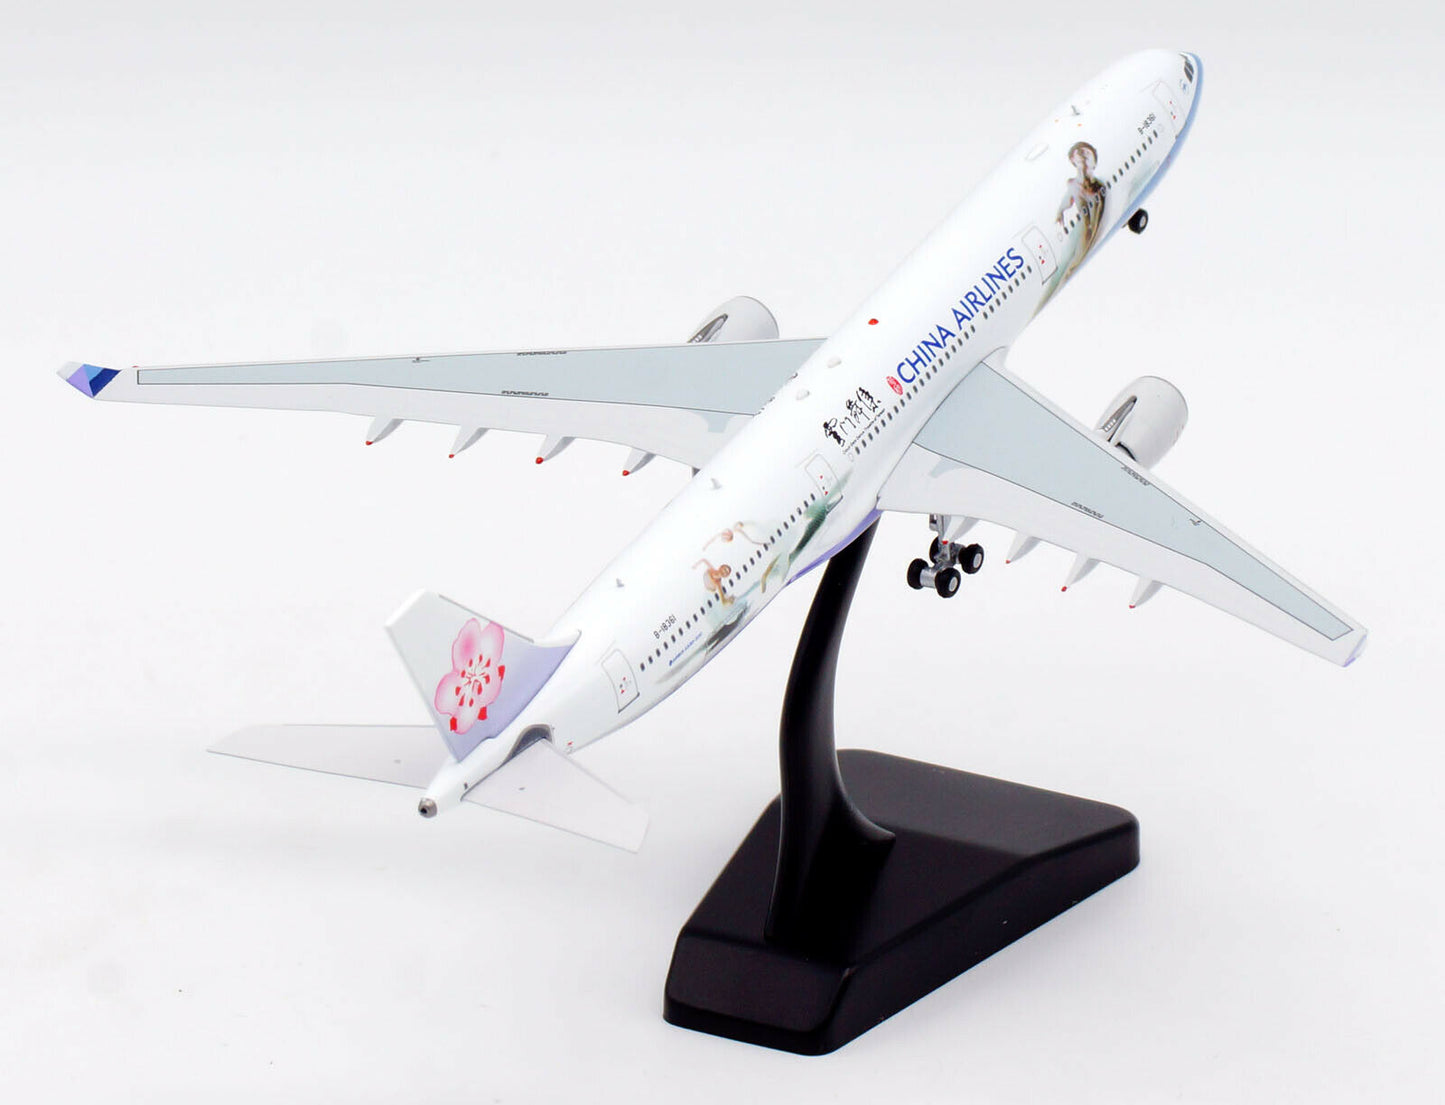 1:400 Aviation400 China Airlines Airbus A330-302 "Special Livery" B-18361 AV4061